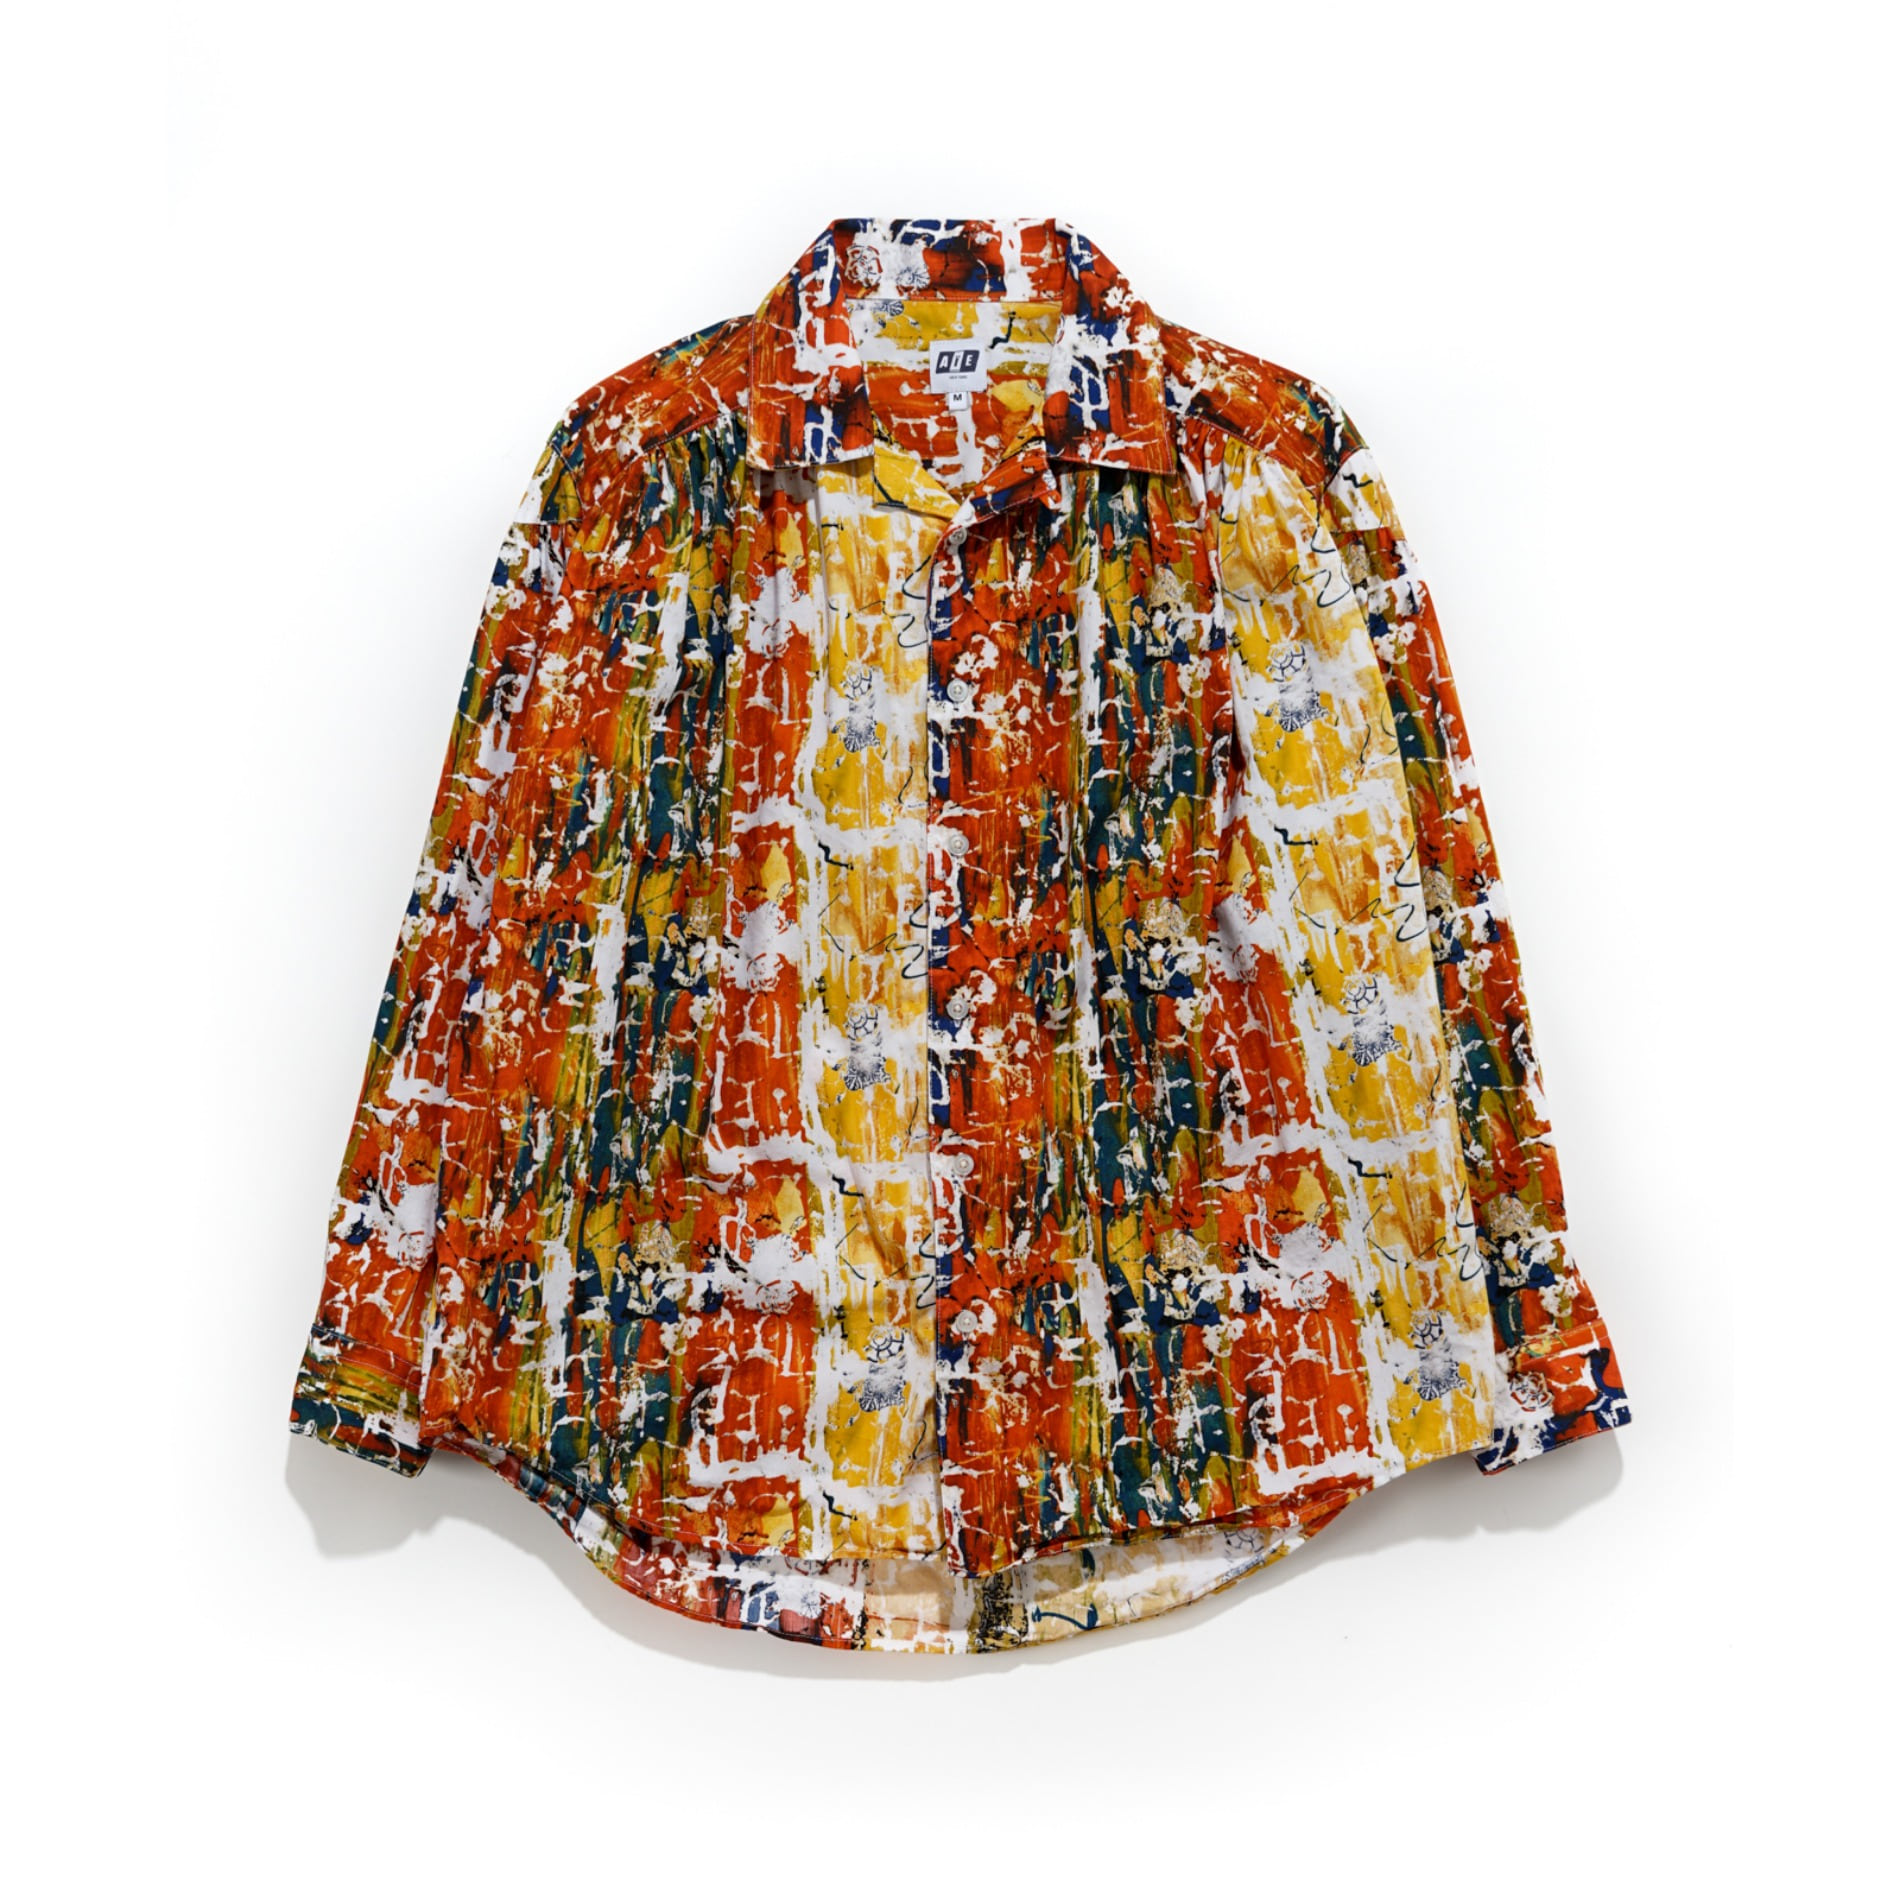 AIE / PAINTER SHIRT YELLOW ORANGE COTTON ABSTRACT